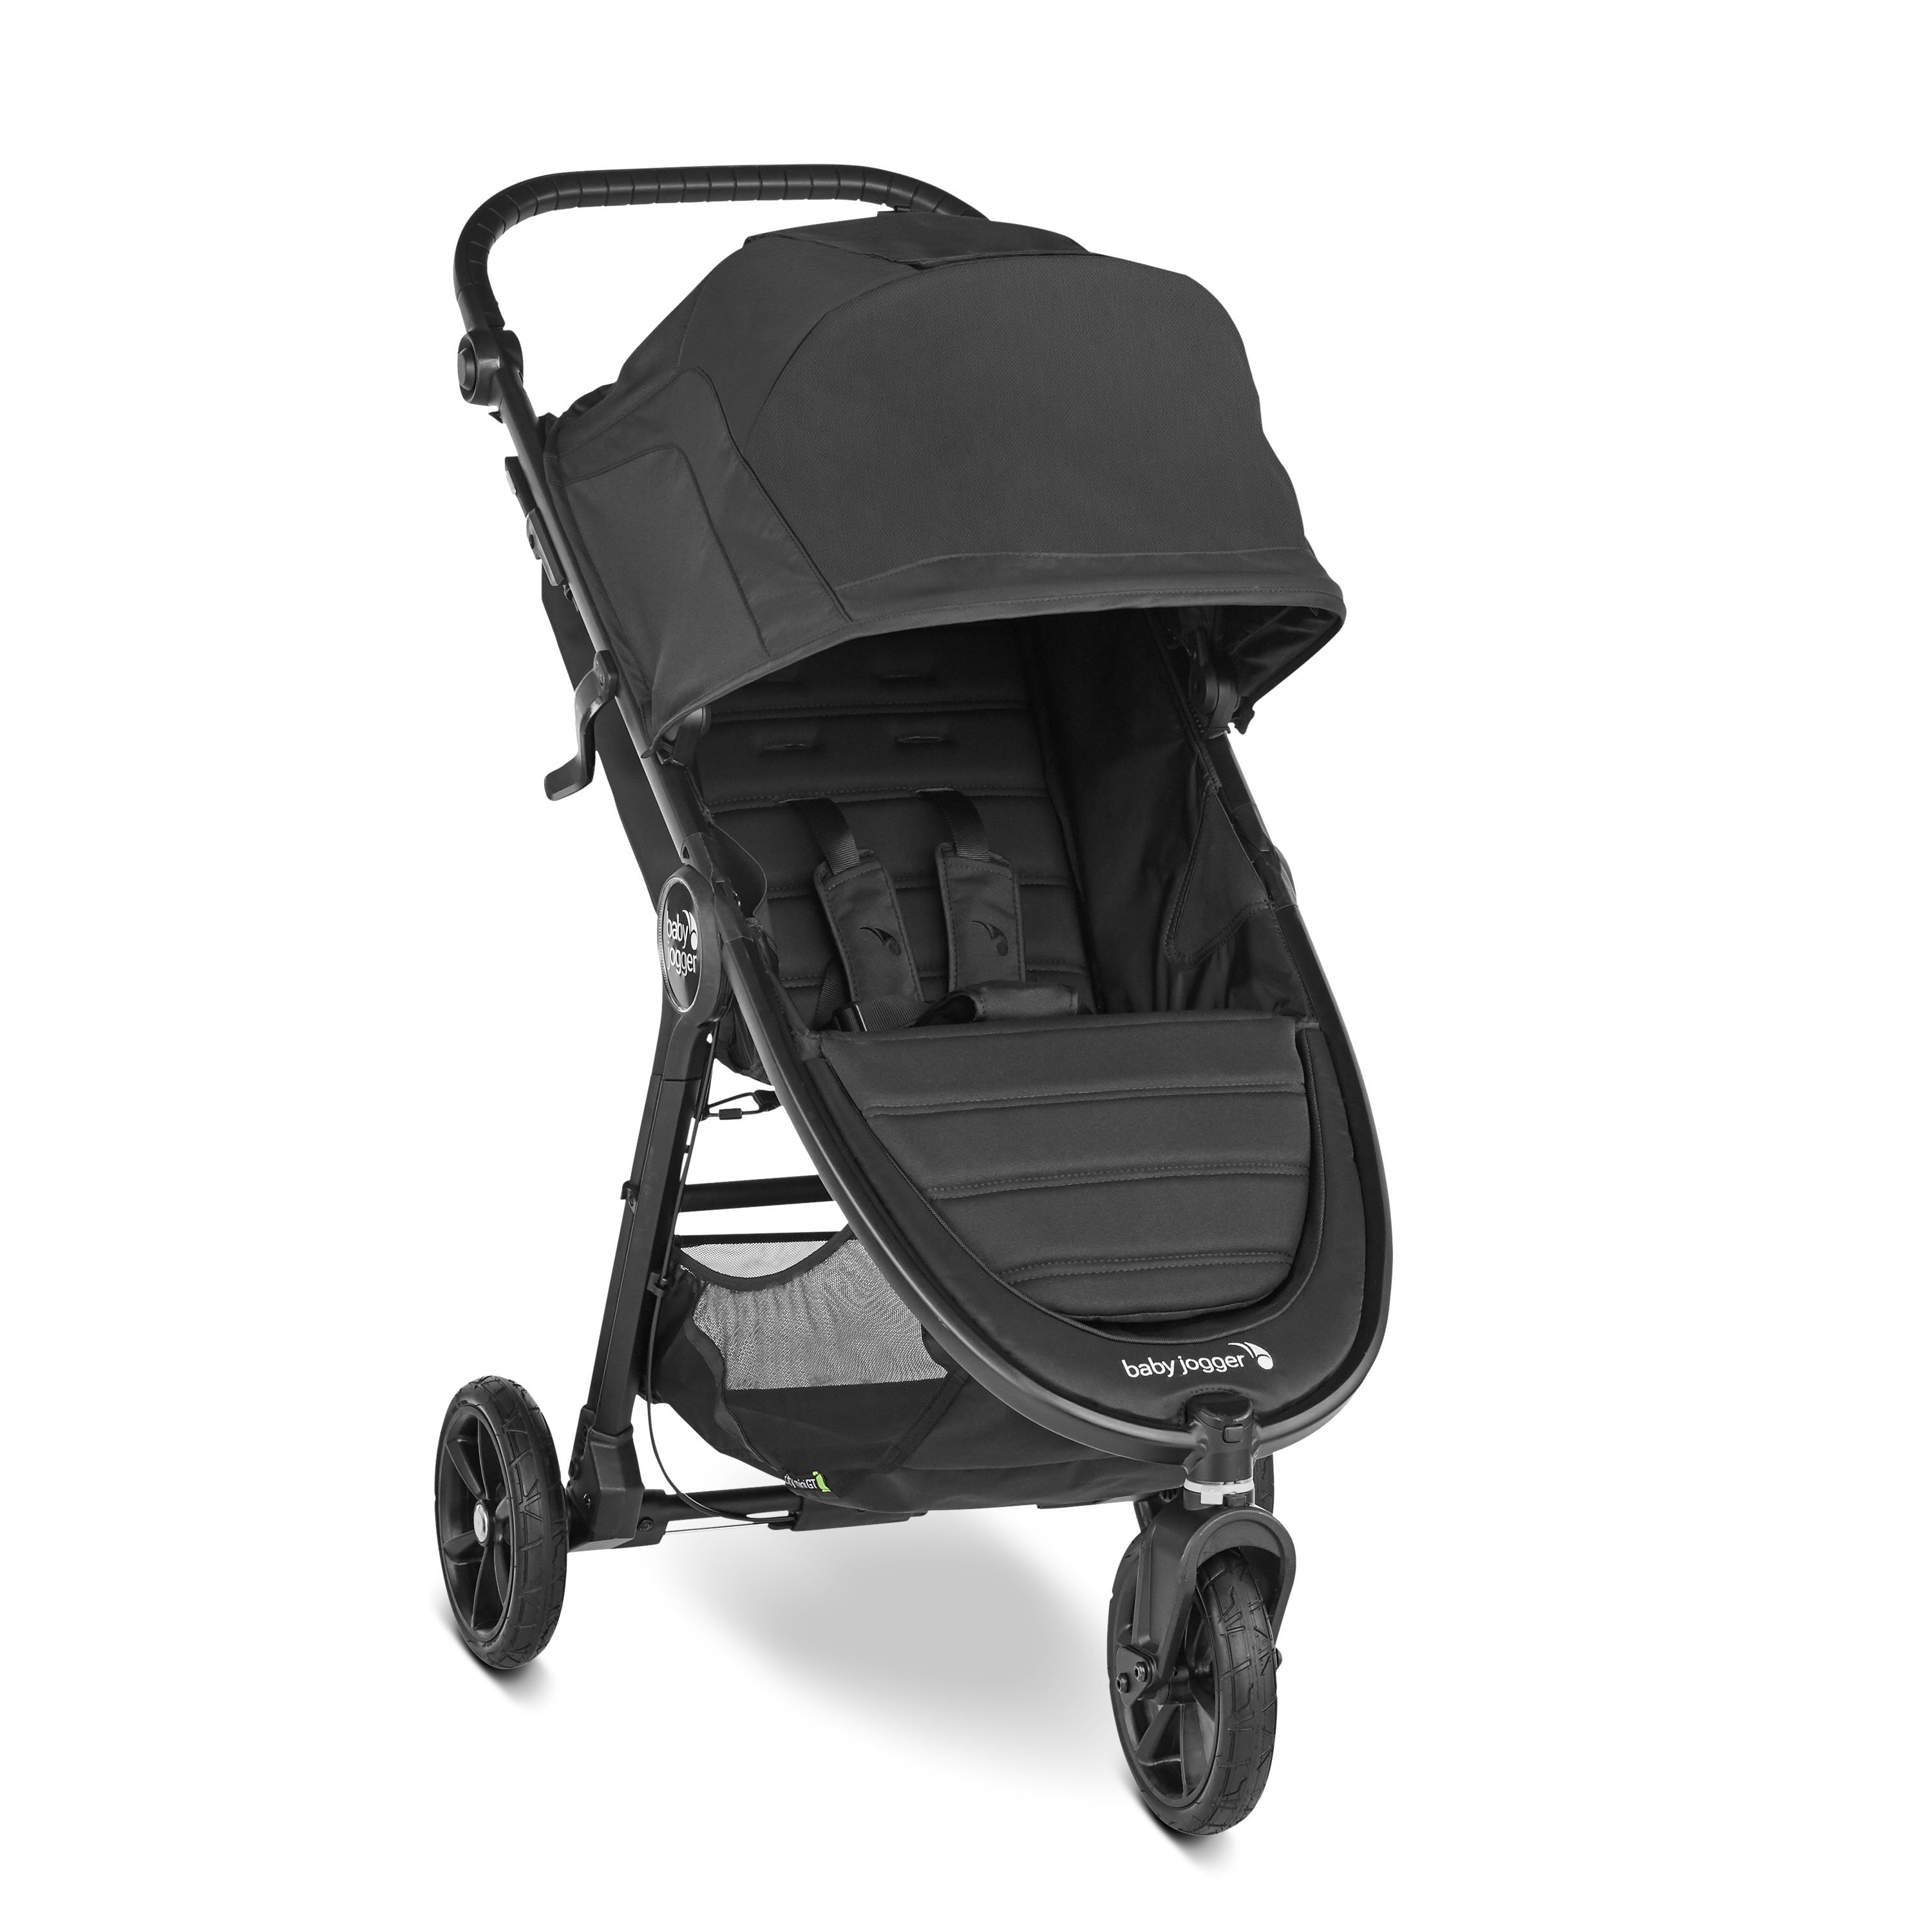 Black Ride On Board With Saddle Compatible With Baby Jogger City Mini 